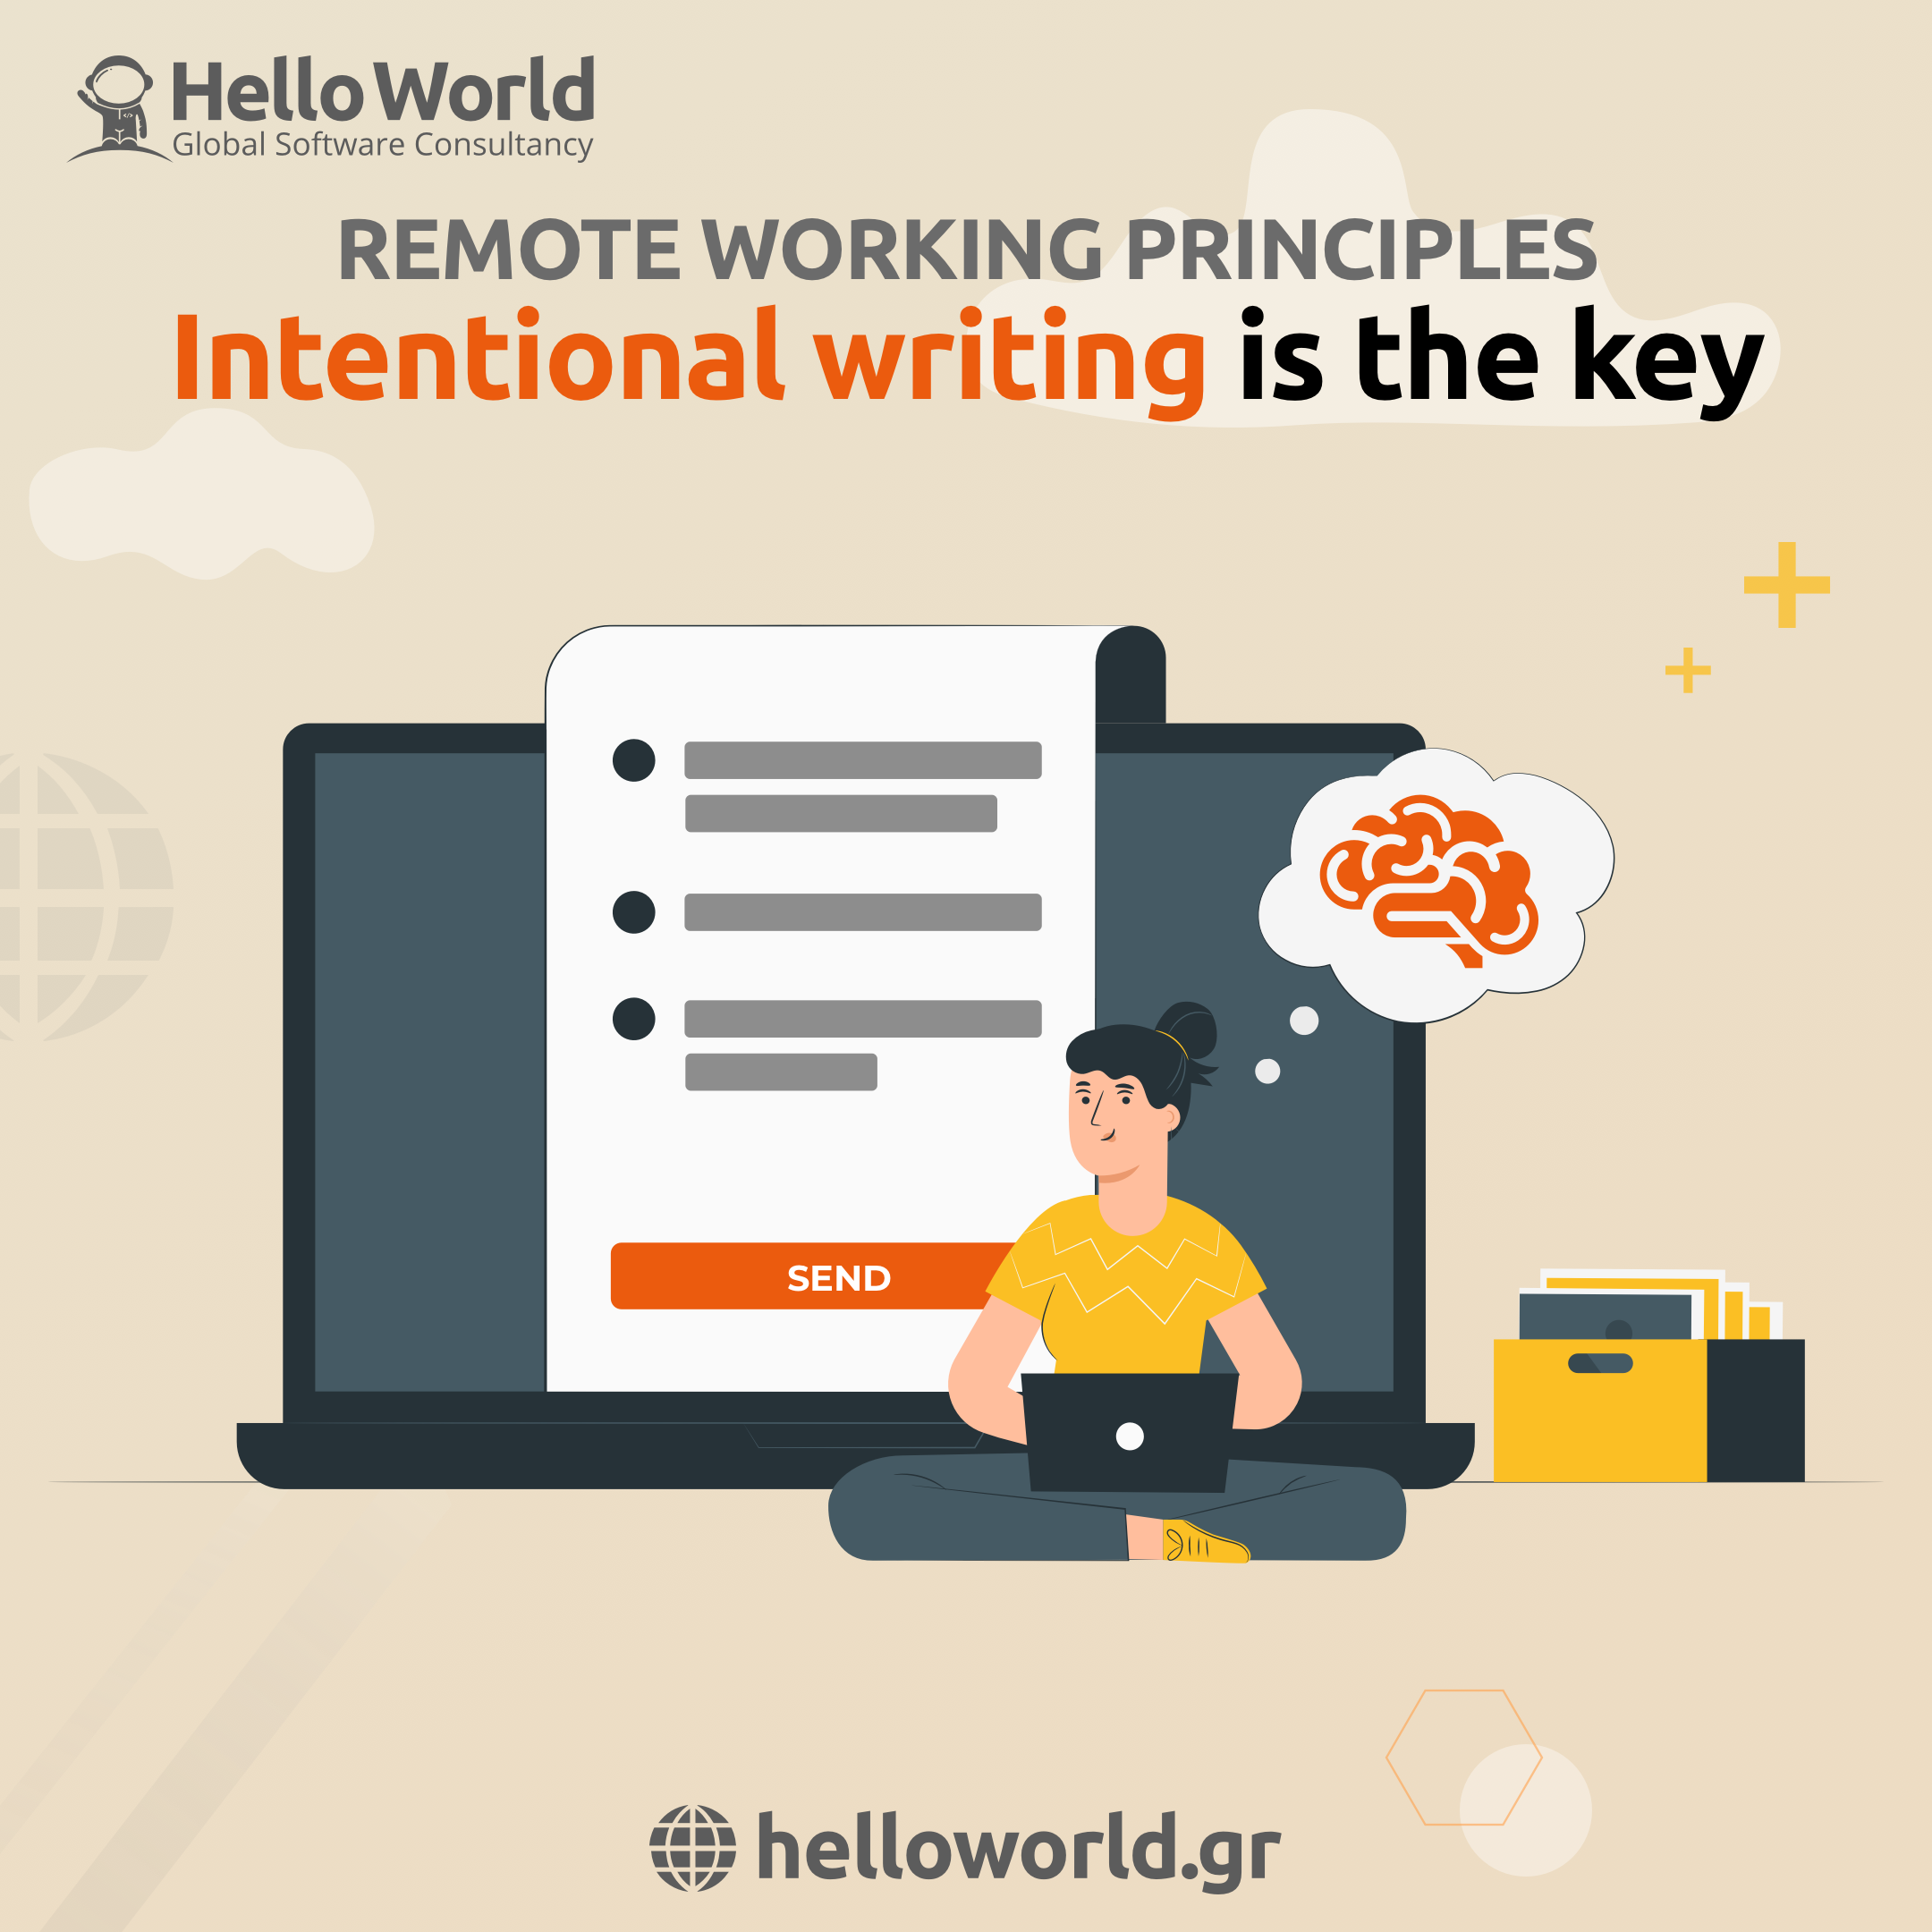 Intentional writing is the key